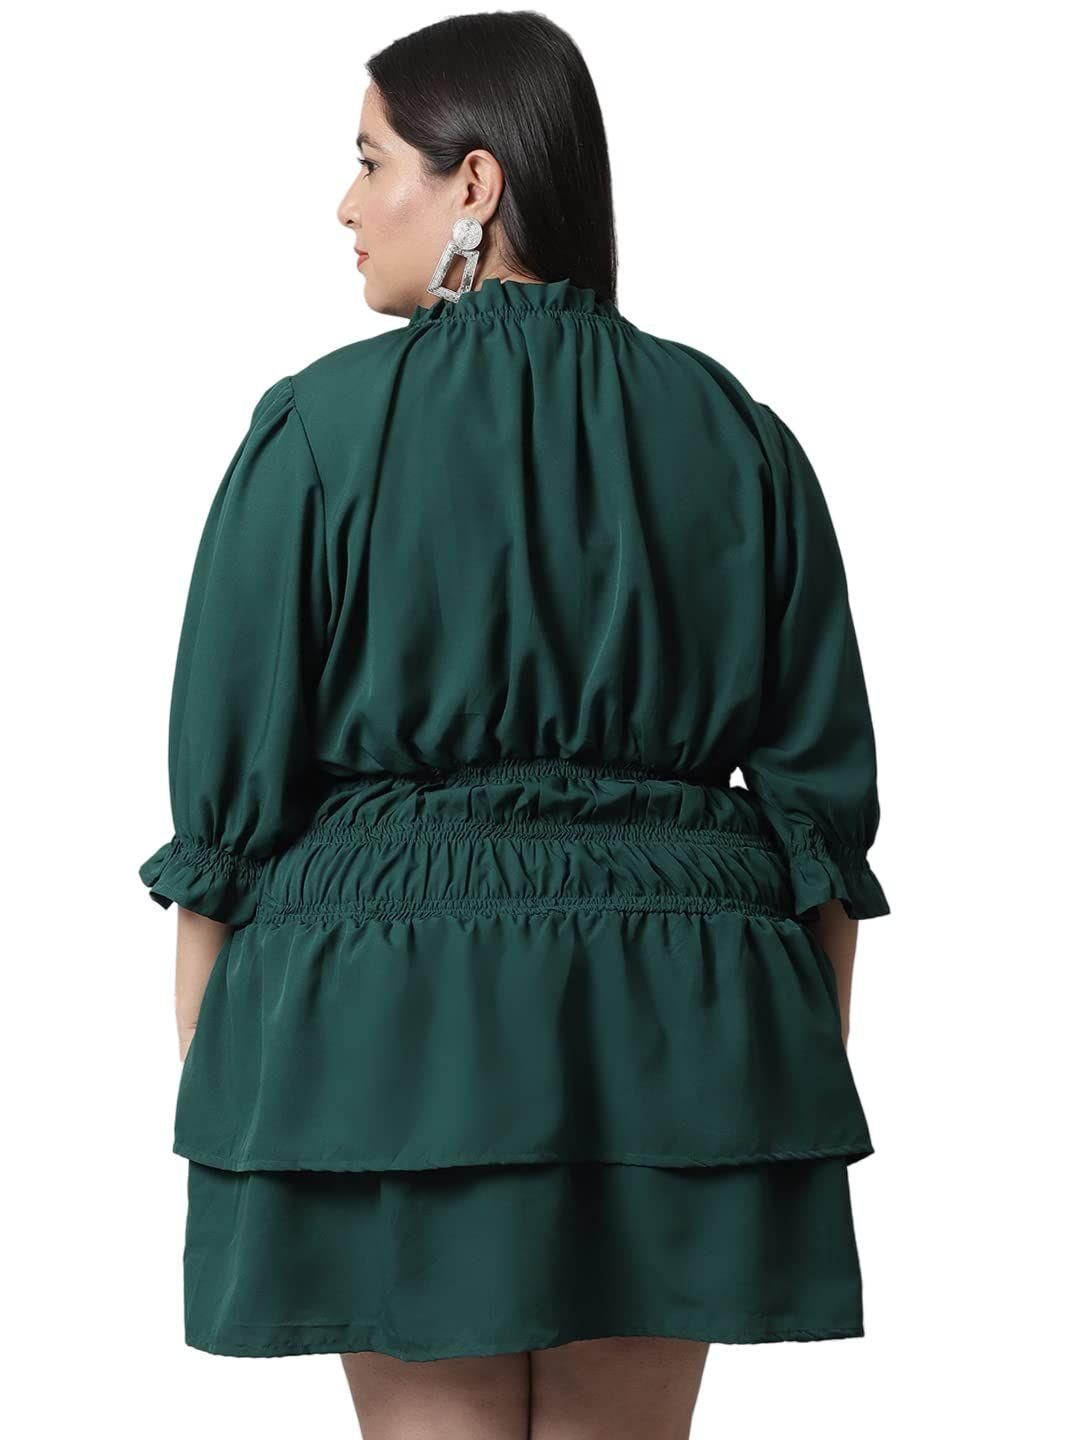 Flambeur Plus Size Green Solid Flared Short Dress for Women